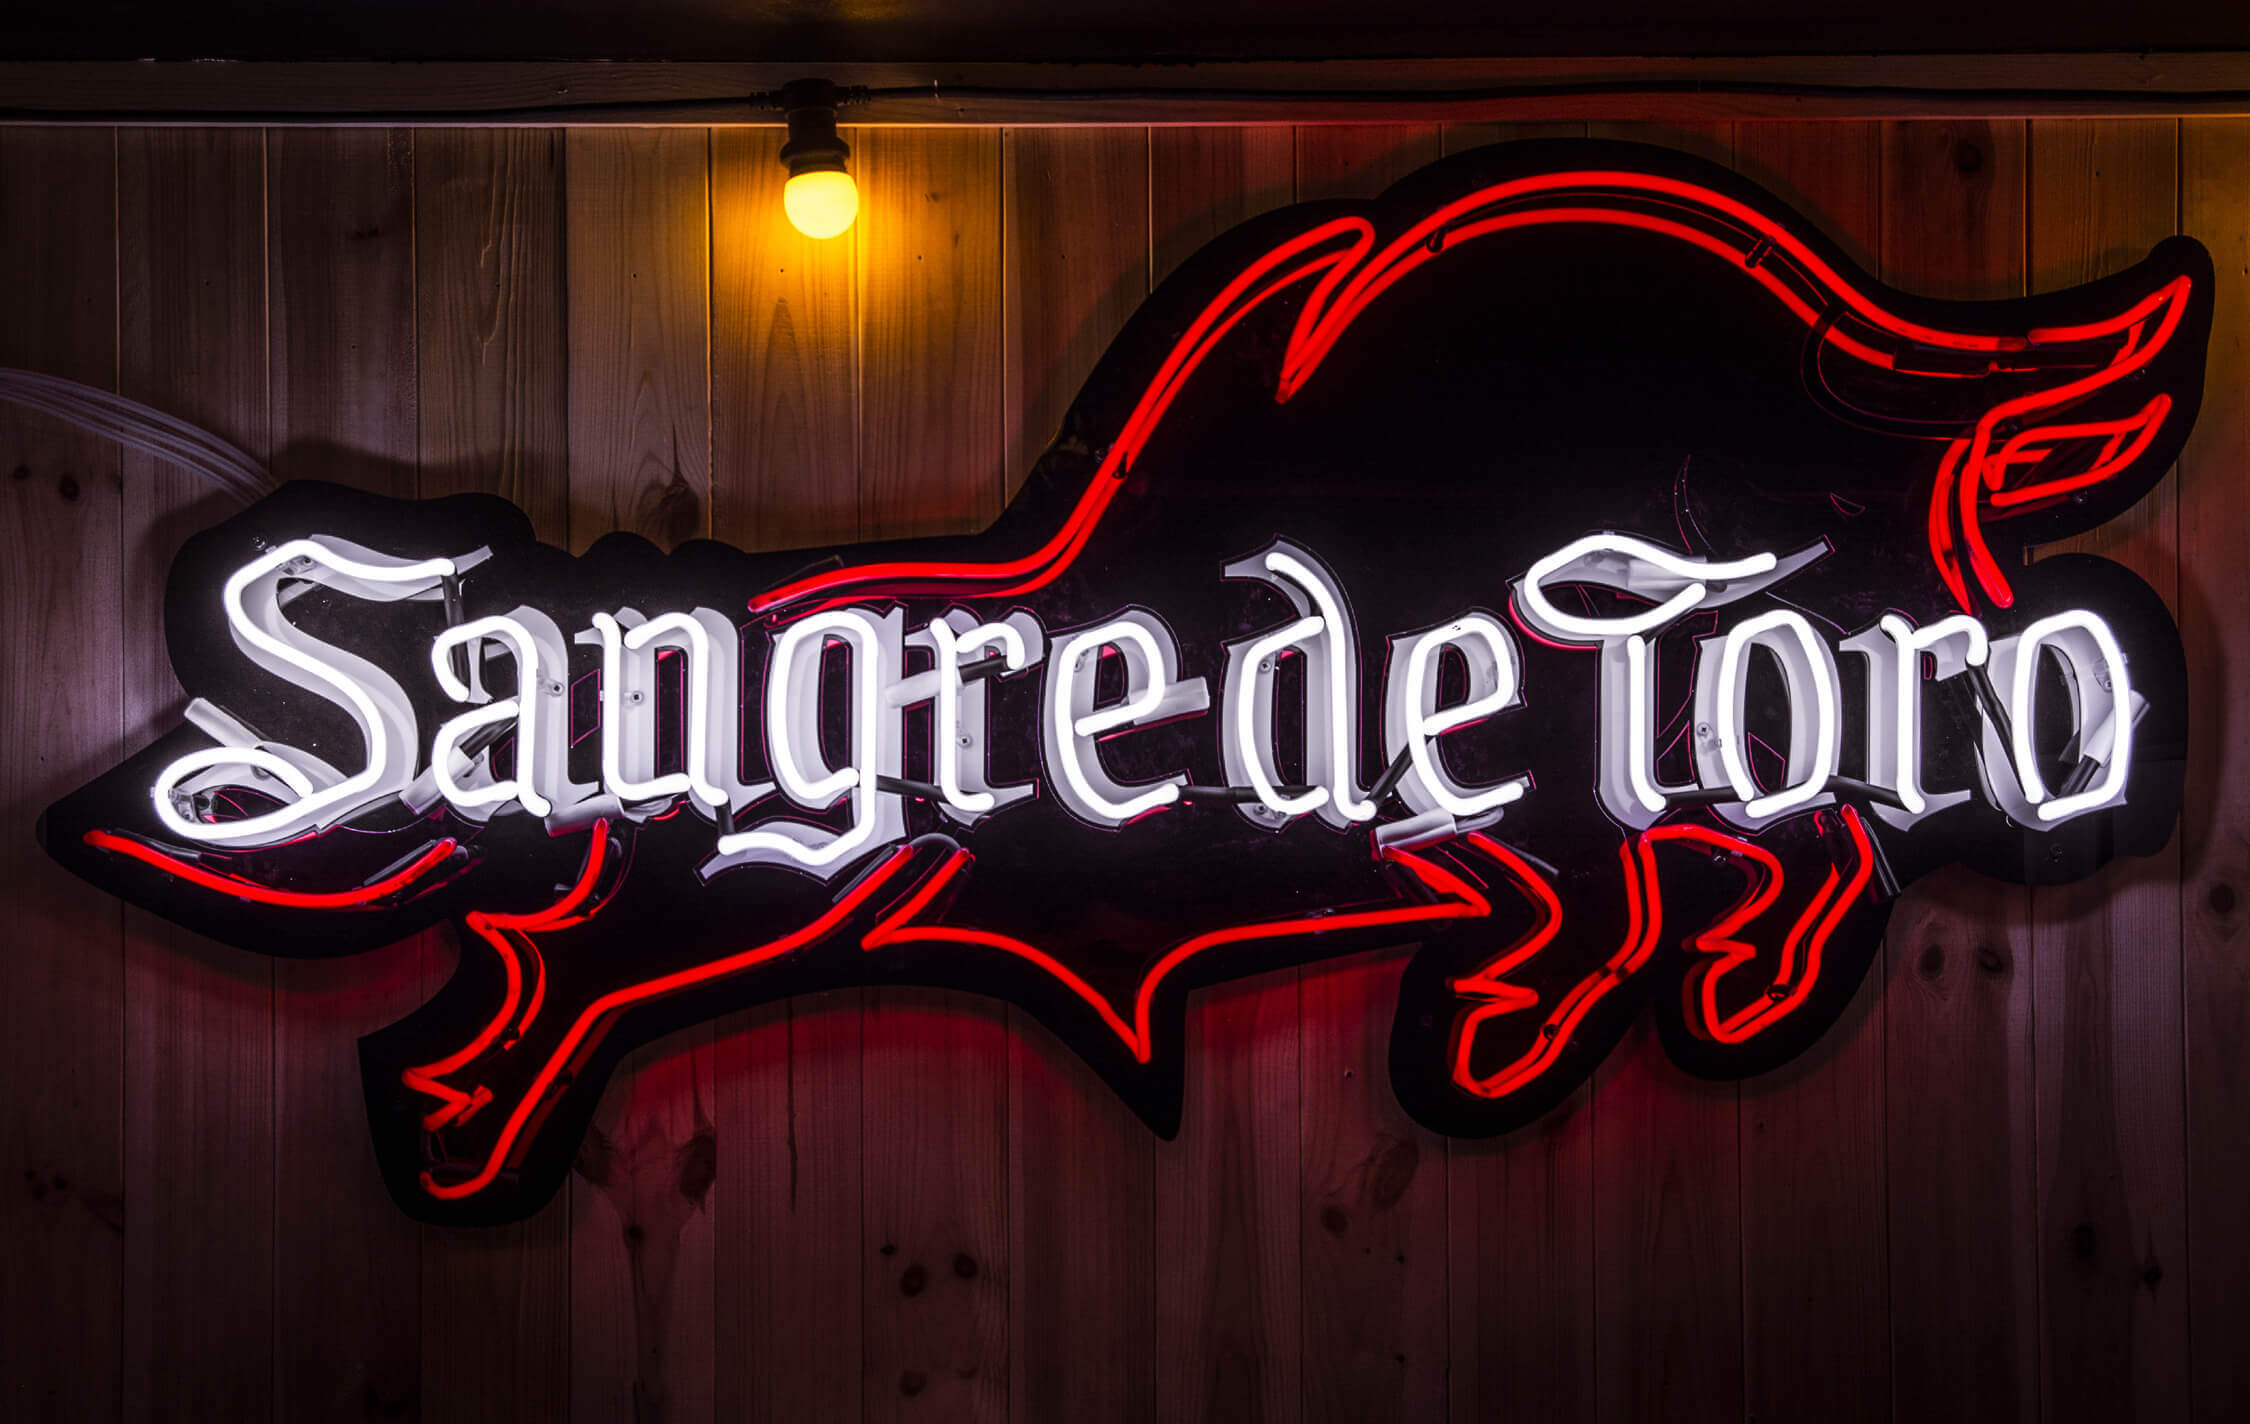 Sangre De Toro - neon-on-on-demand-sangre-the-torro-neon-on-a-bar-by-bar-from-neon-plexes-red-mirror-glass-tinted-in-mass-red-neonon-on-electricity-desks